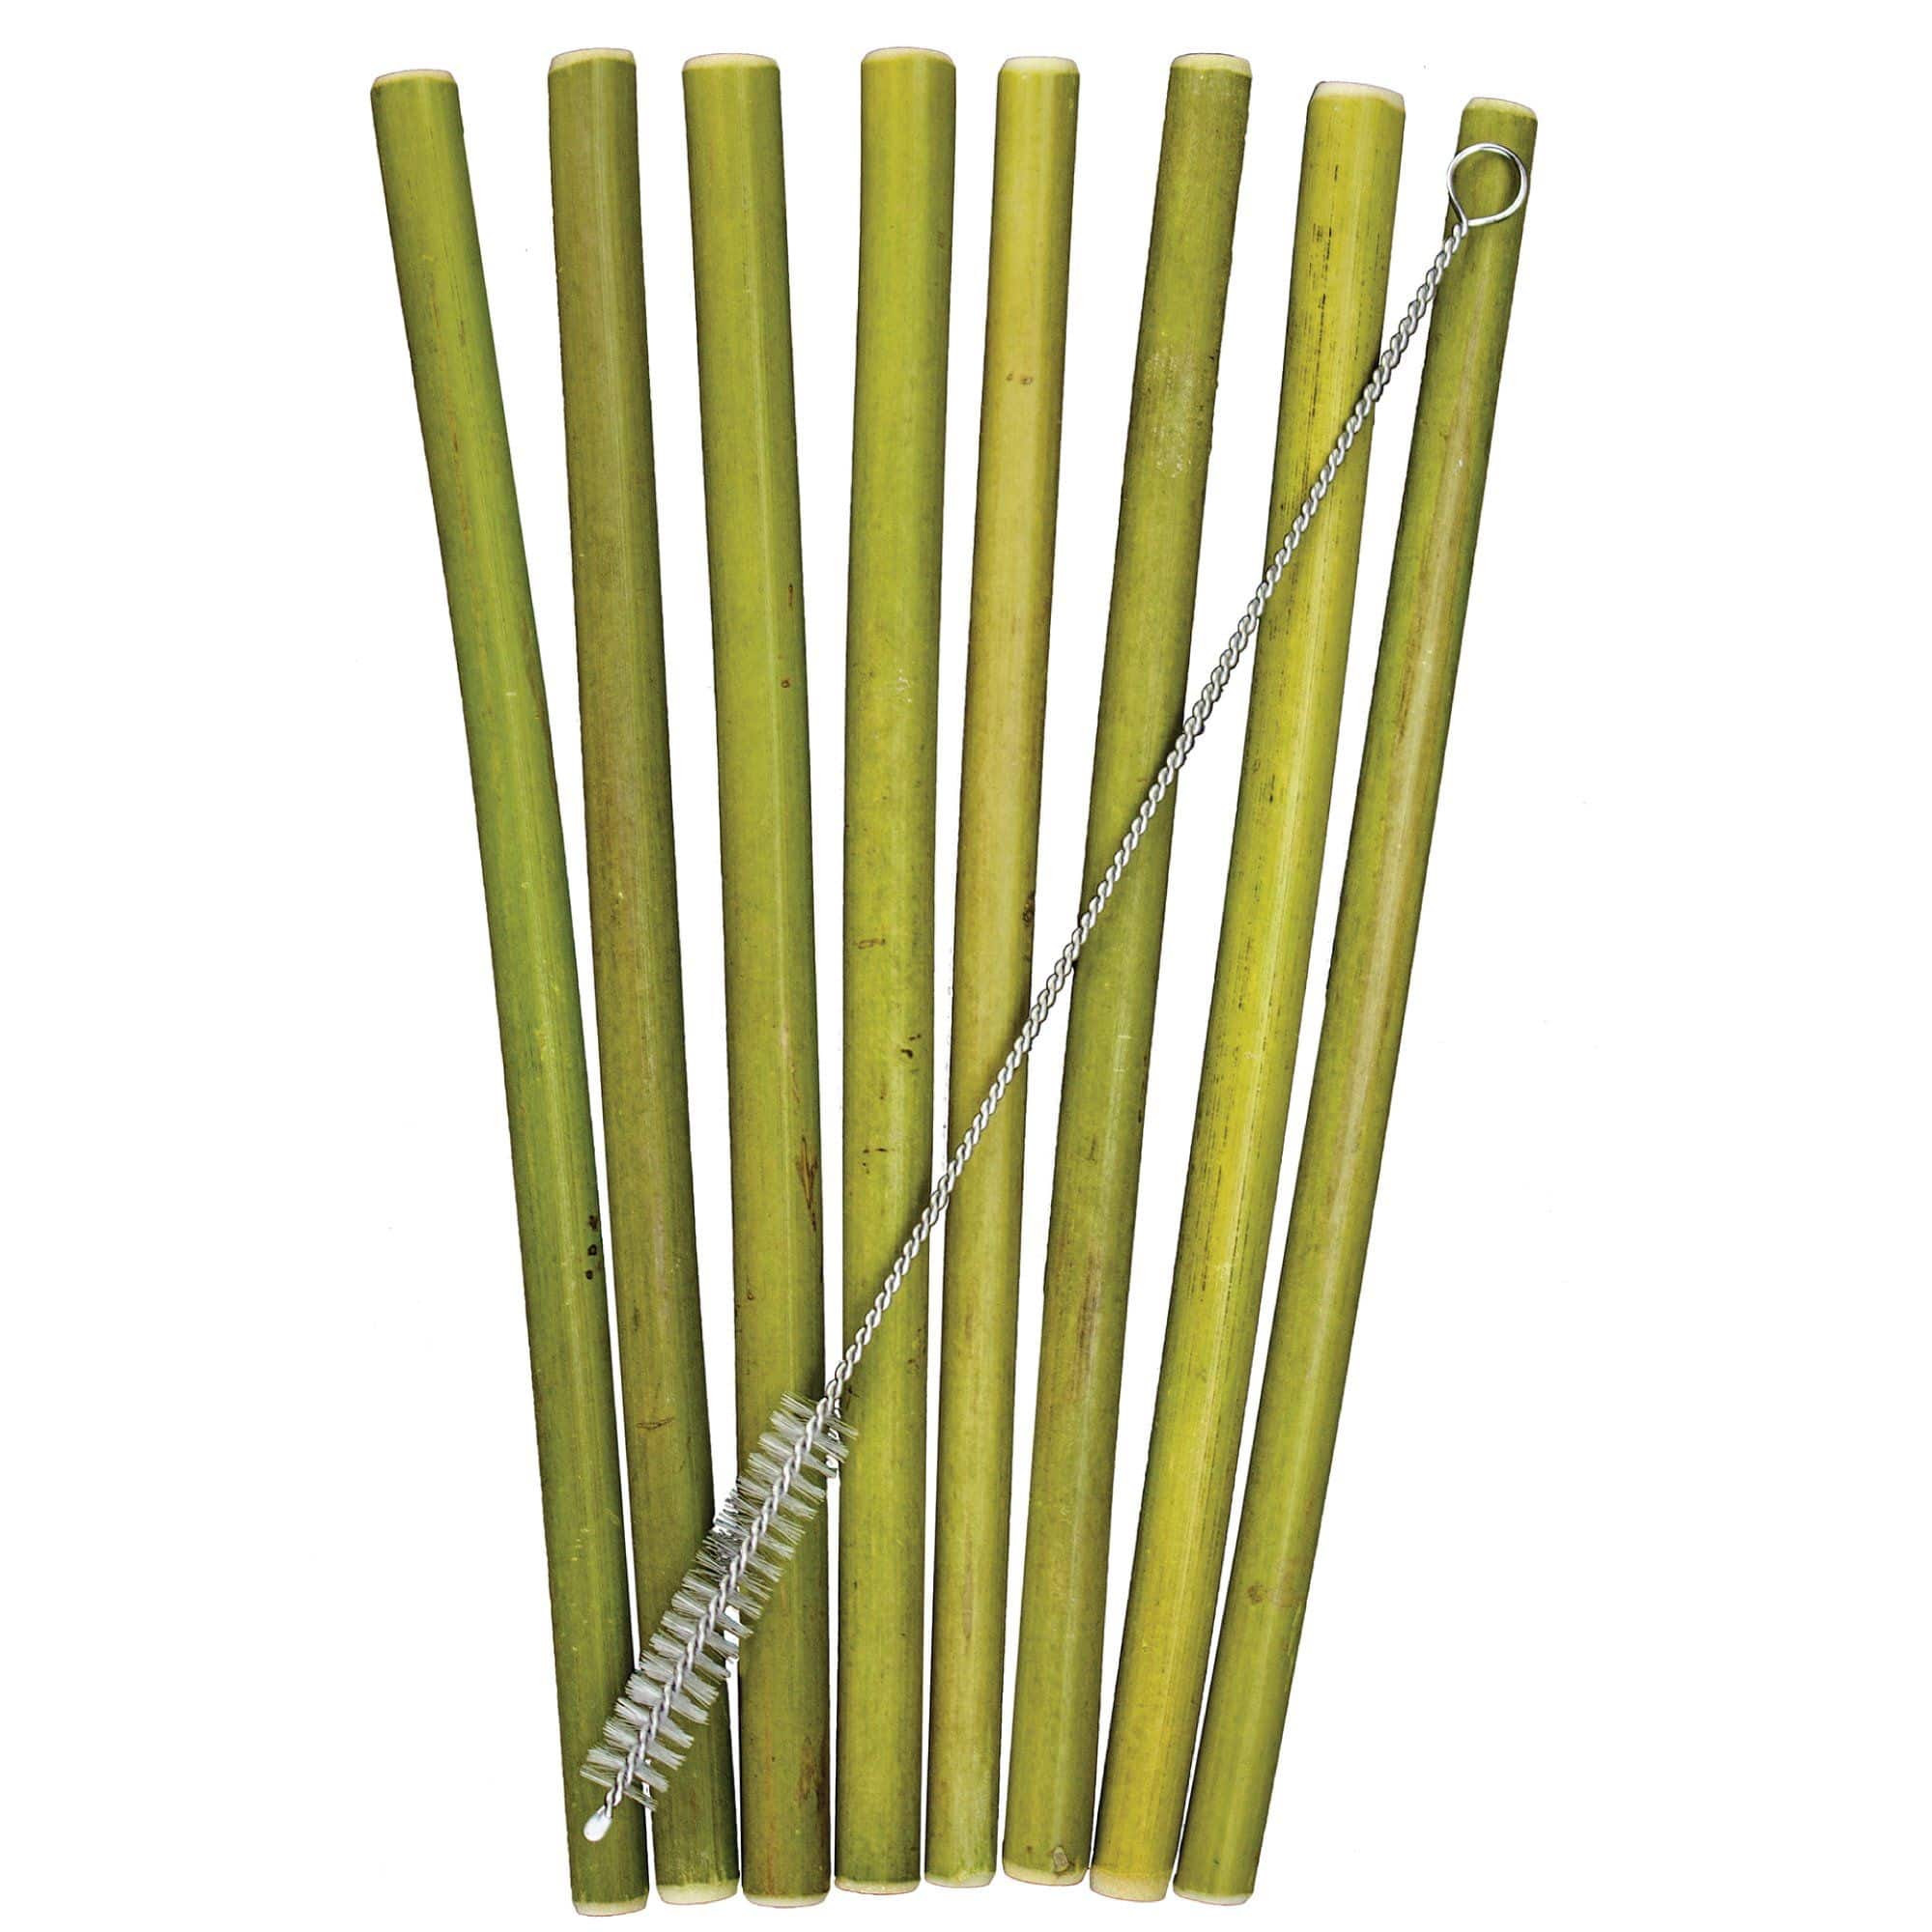 https://totallybamboo.com/cdn/shop/products/8-pack-reusable-bamboo-drinking-straws-dishwasher-safe-totally-bamboo-648206.jpg?v=1627953025